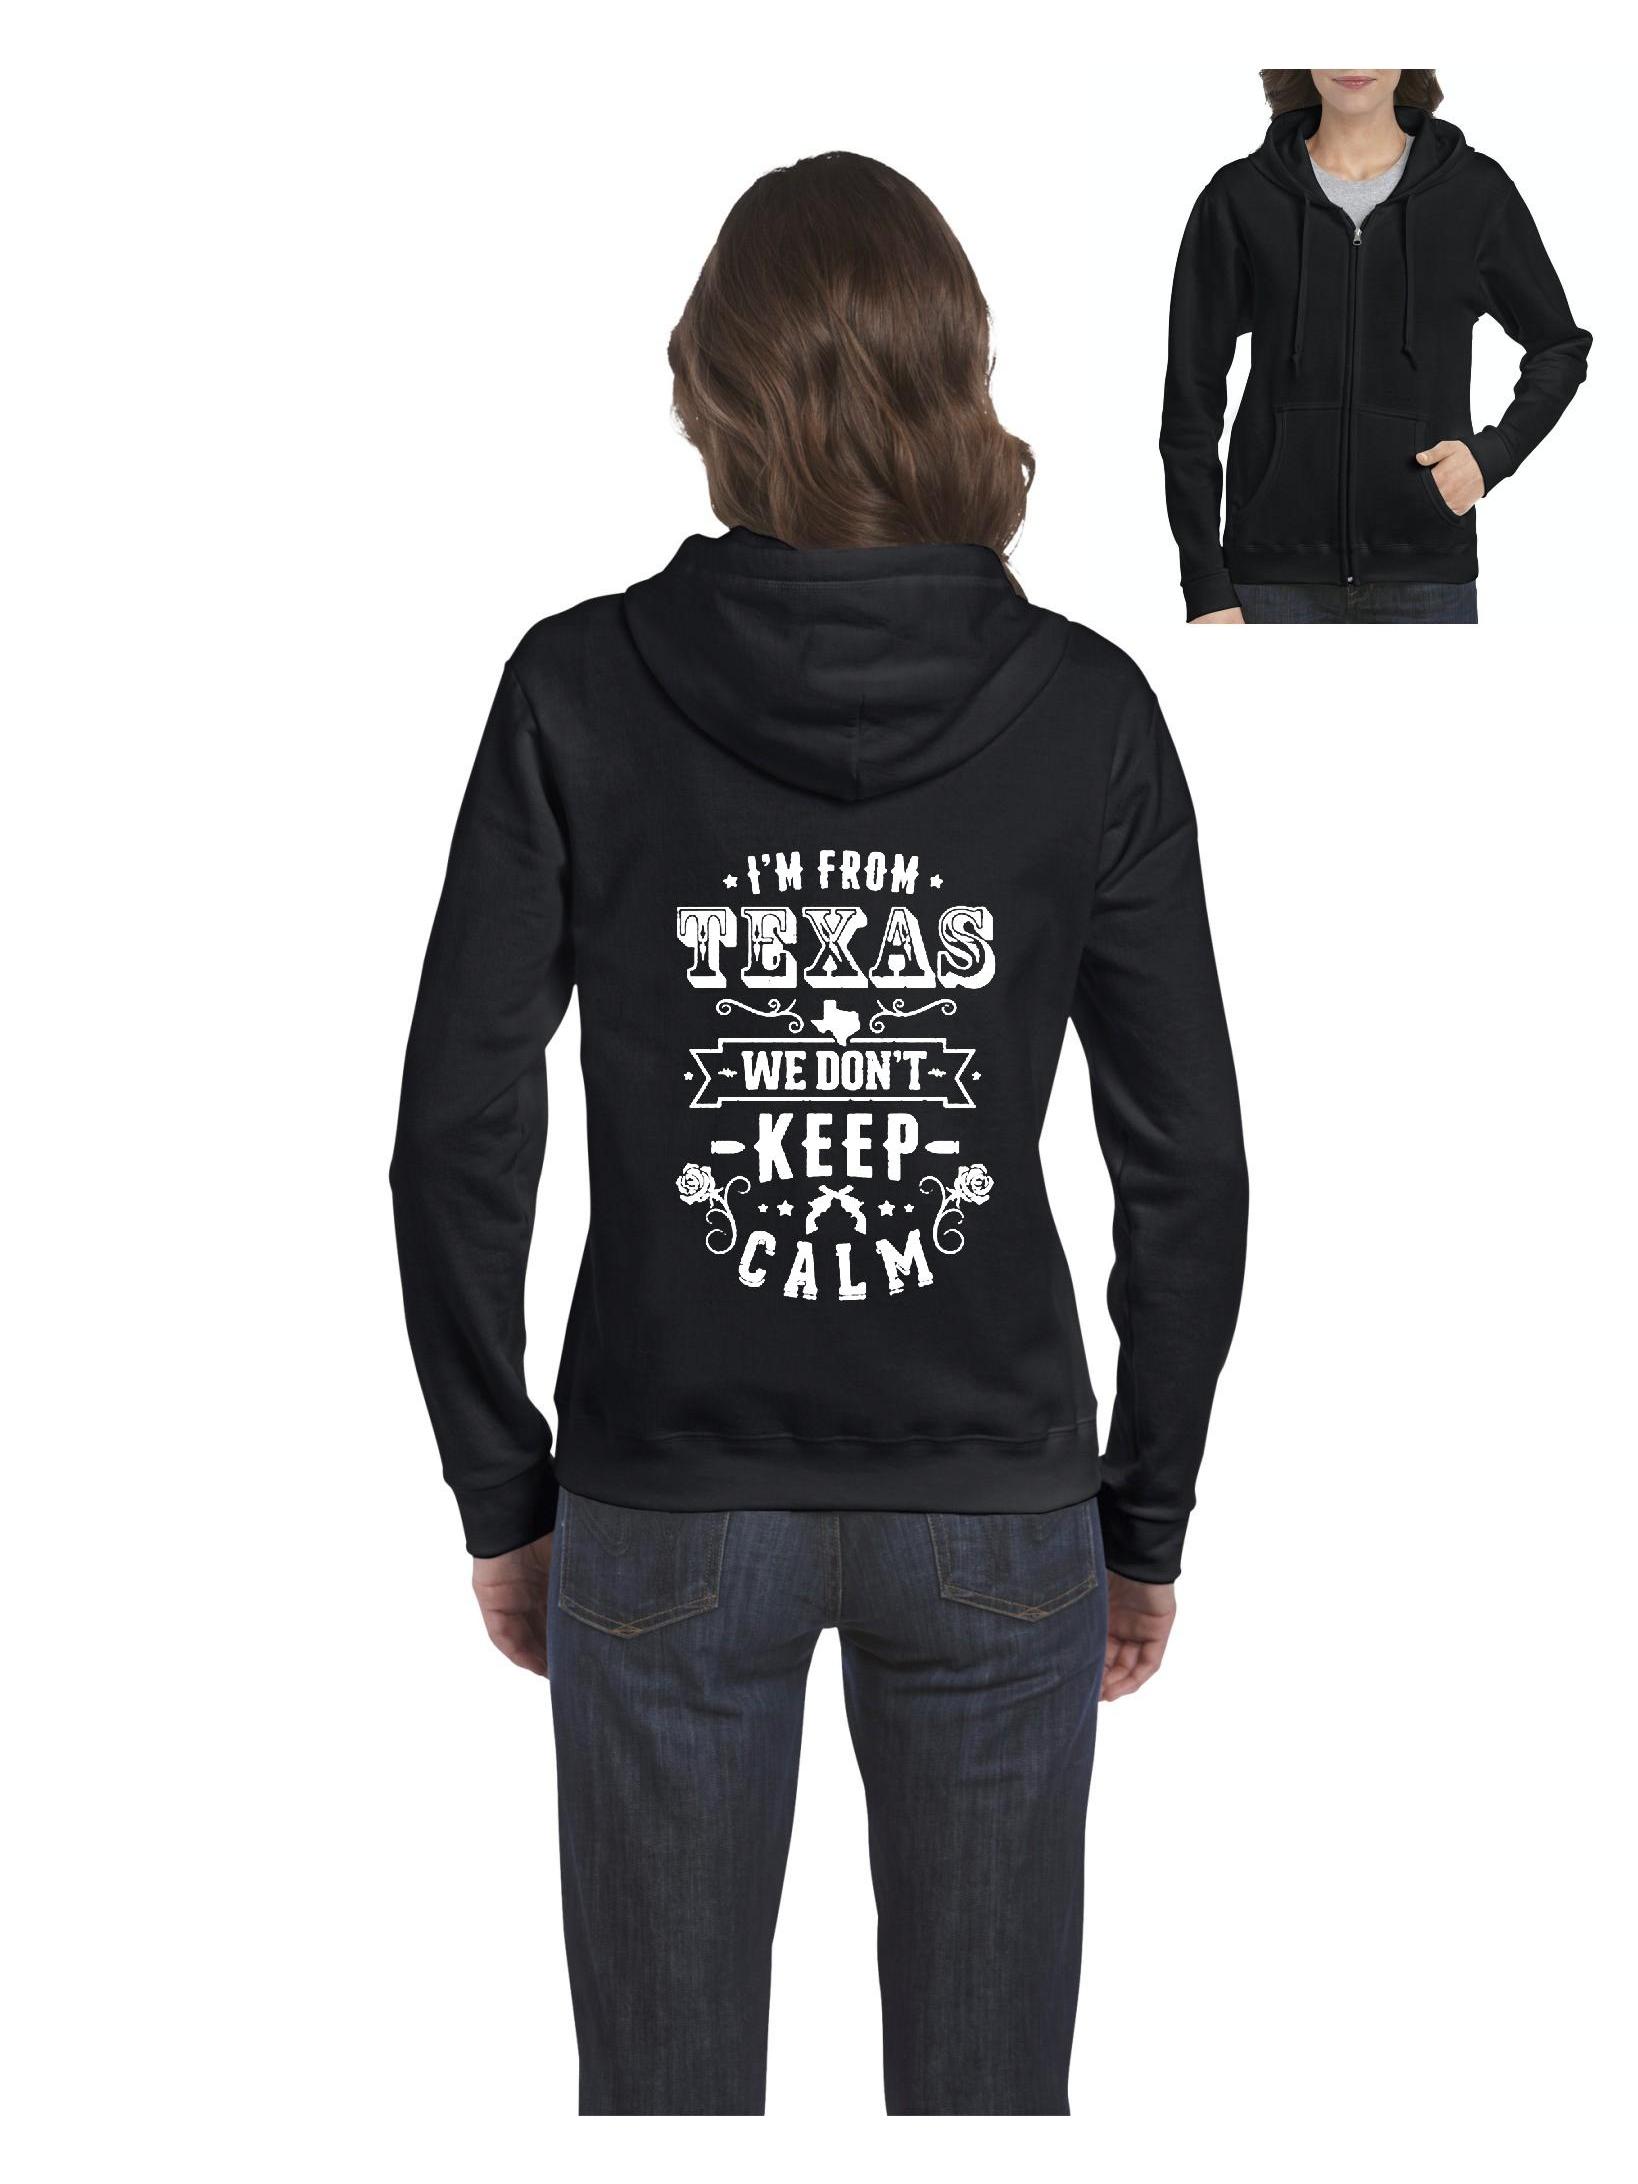 MmF - Women's Sweatshirt Full-Zip Pullover, up to Women Size 3XL - I am From Texas TX Texas - image 1 of 5